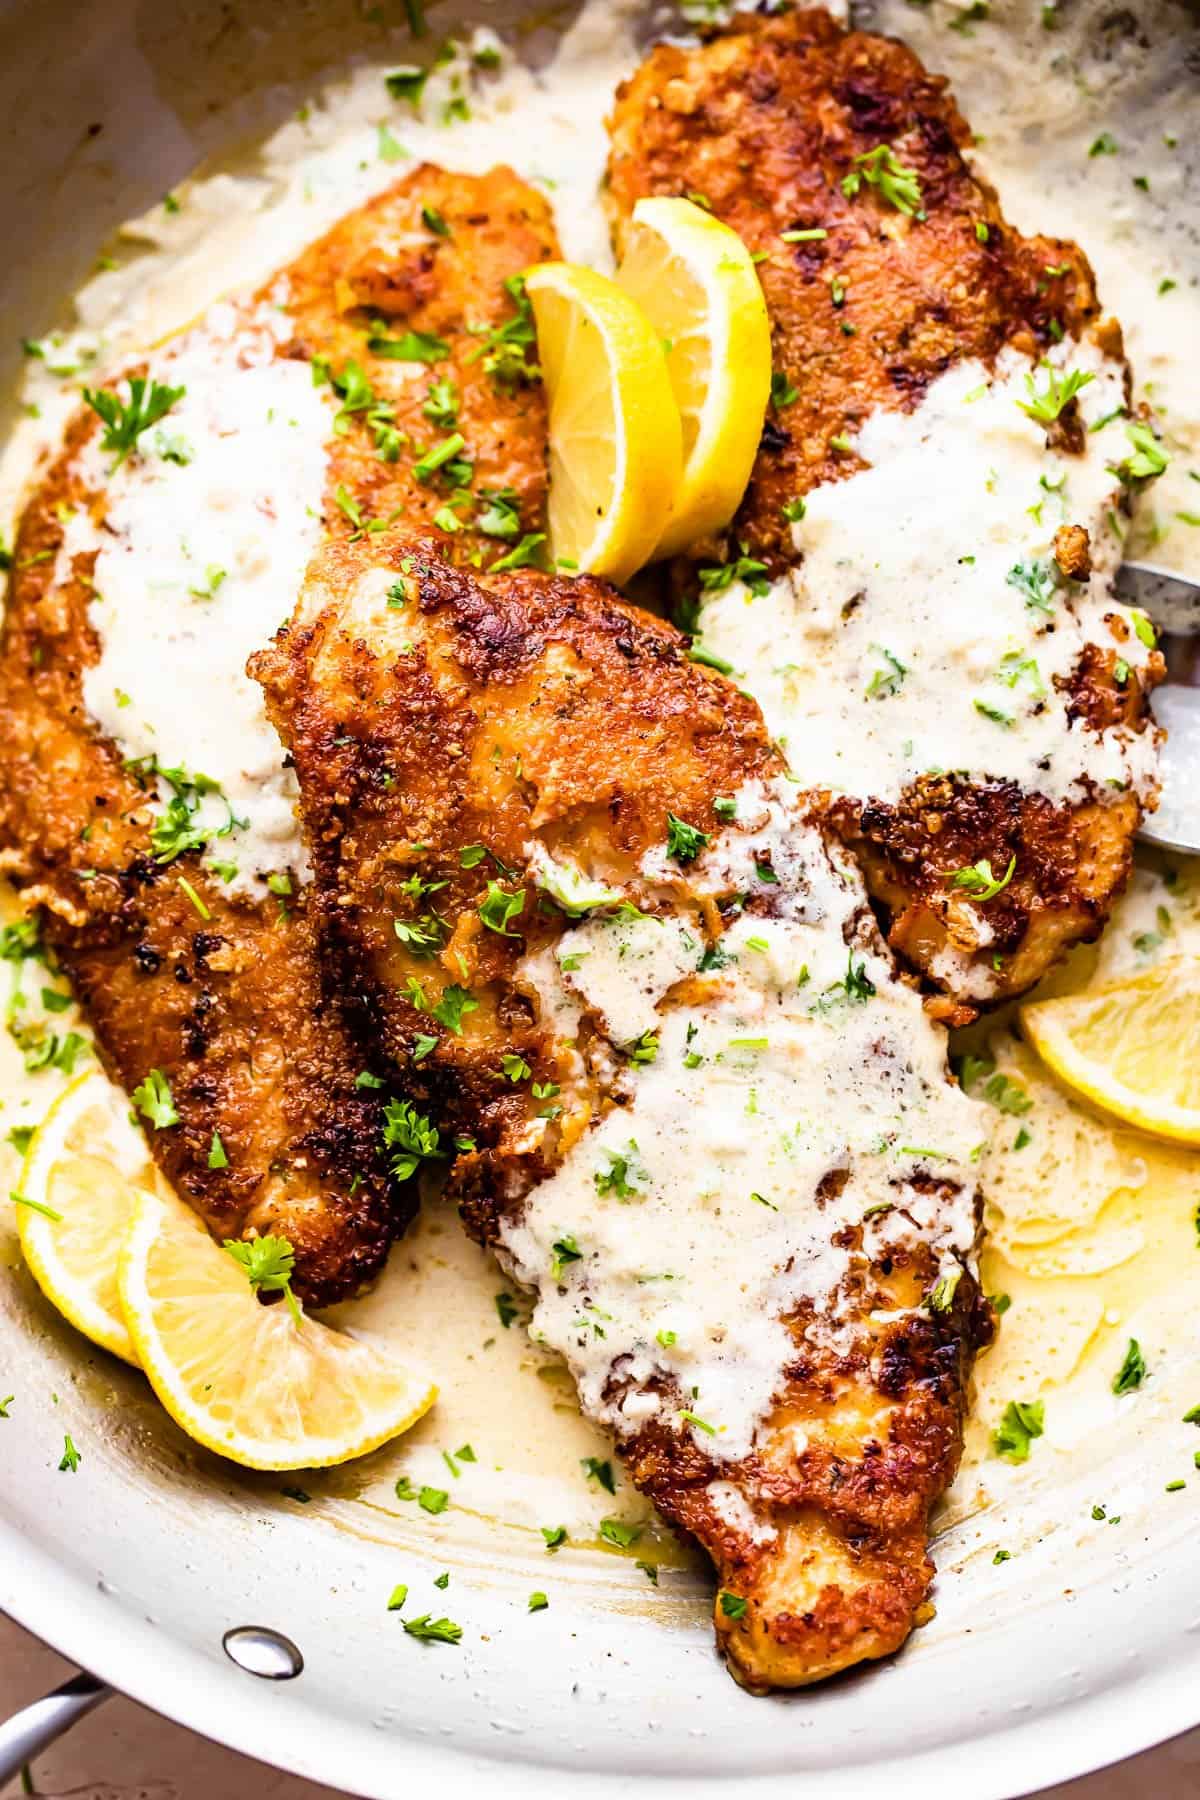 three breaded turkey cutlets topped with creamy lemon sauce and garnished with lemon slices and parsley